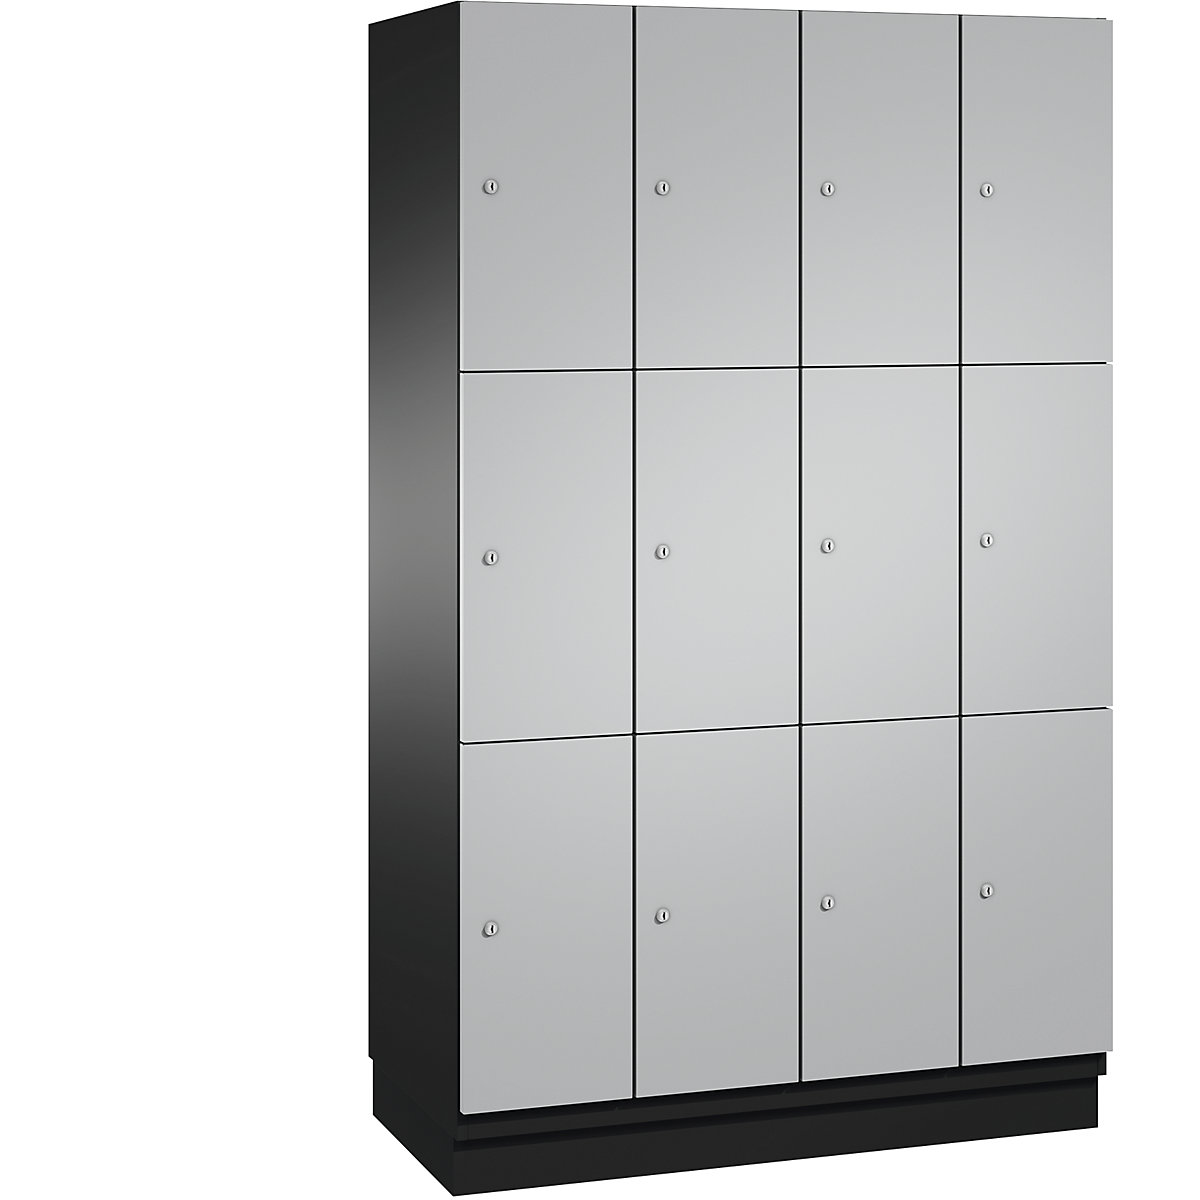 CAMBIO compartment locker with sheet steel doors – C+P, 12 compartments, width 1200 mm, body black grey / door white aluminium, compartment height 616.6 mm-20